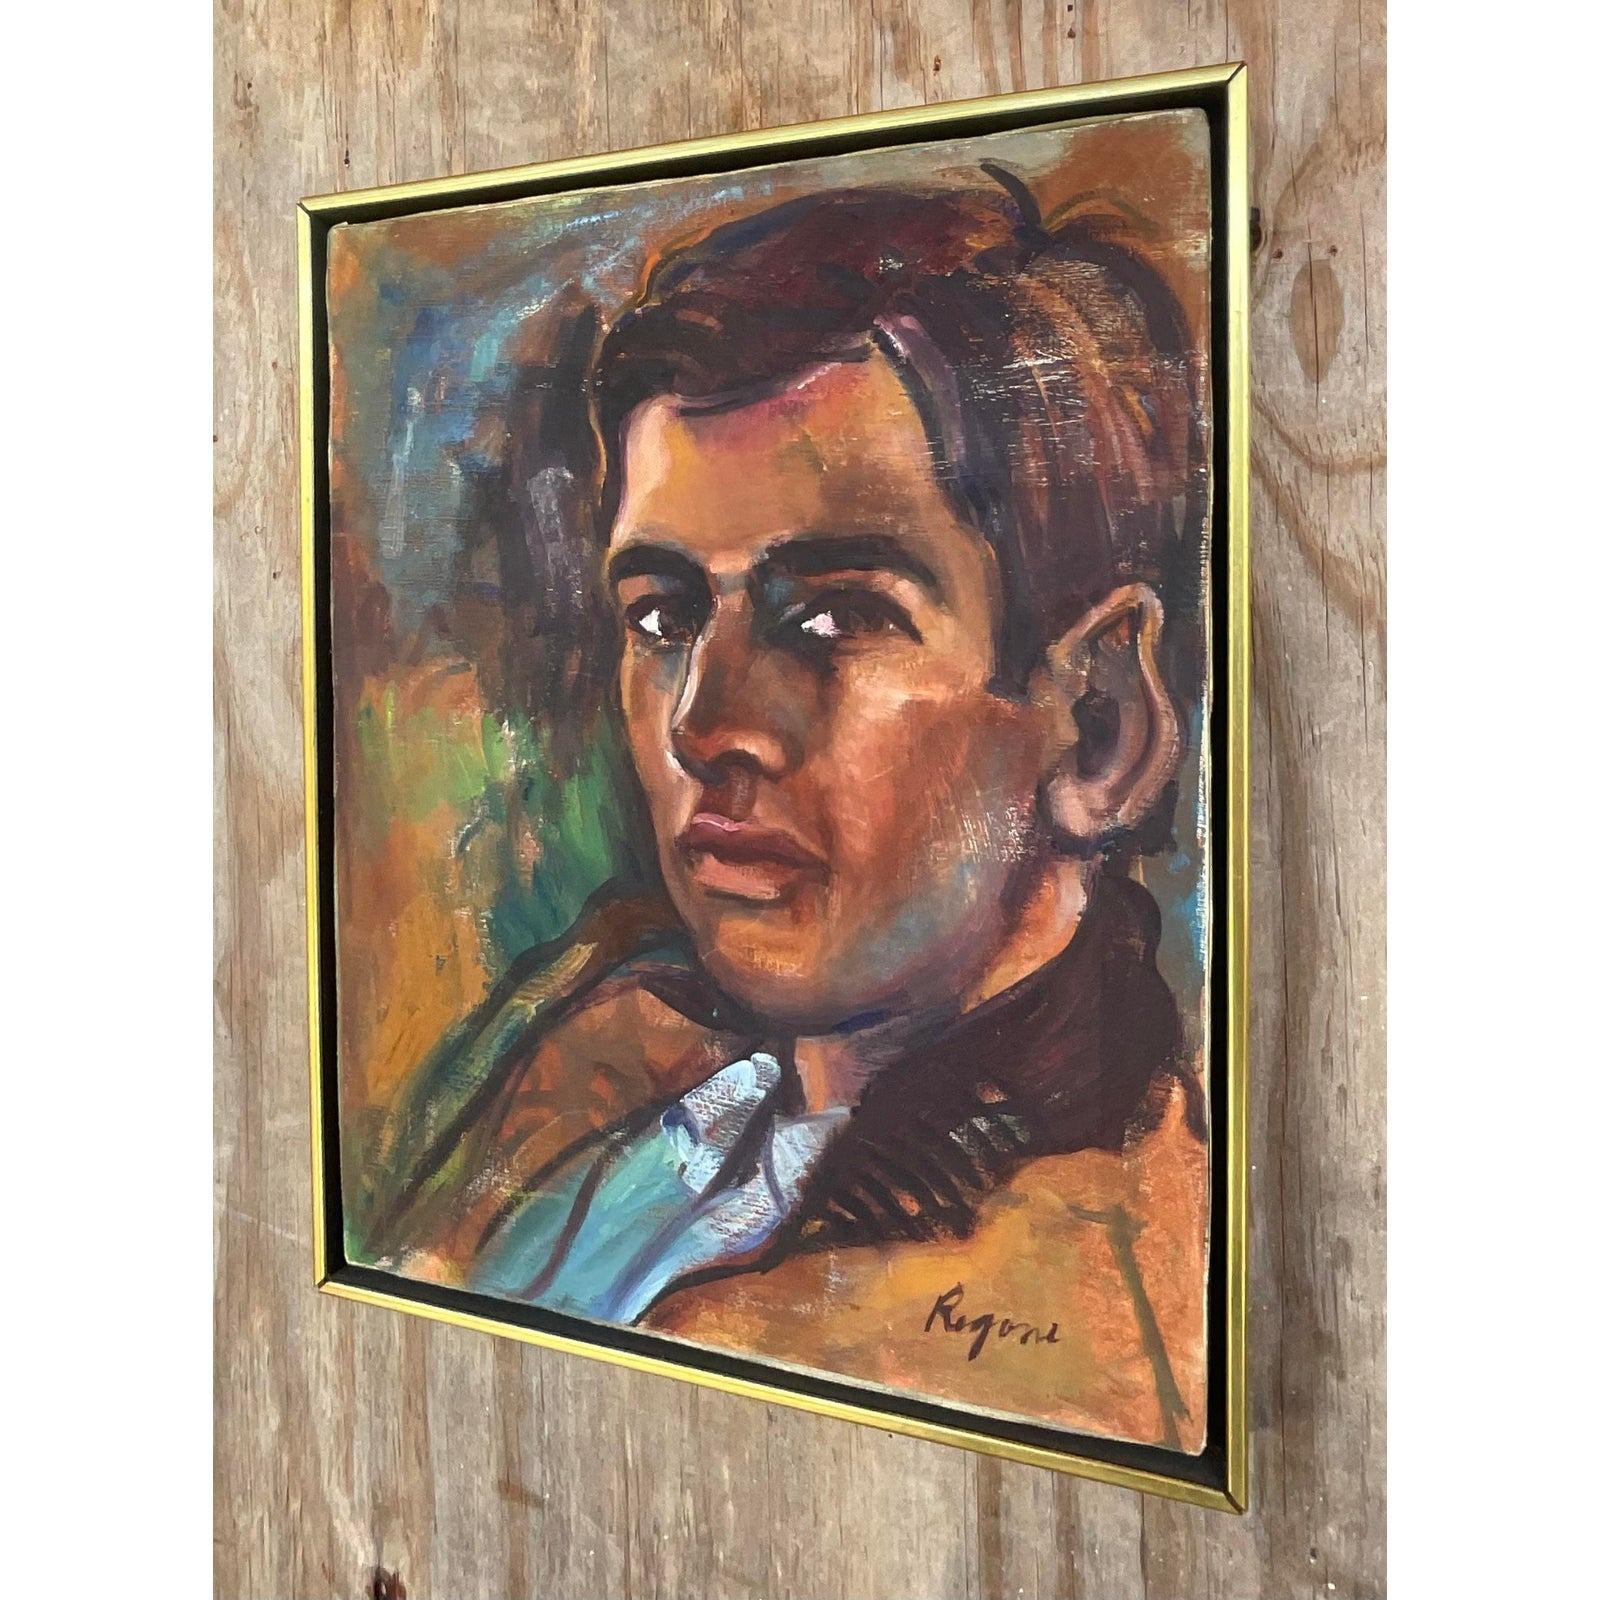 A fabulous vintage Boho original oil portrait of canvas. A chic composition of a young Greek man in dark moody colors. Acquired from a Palm Beach estate.